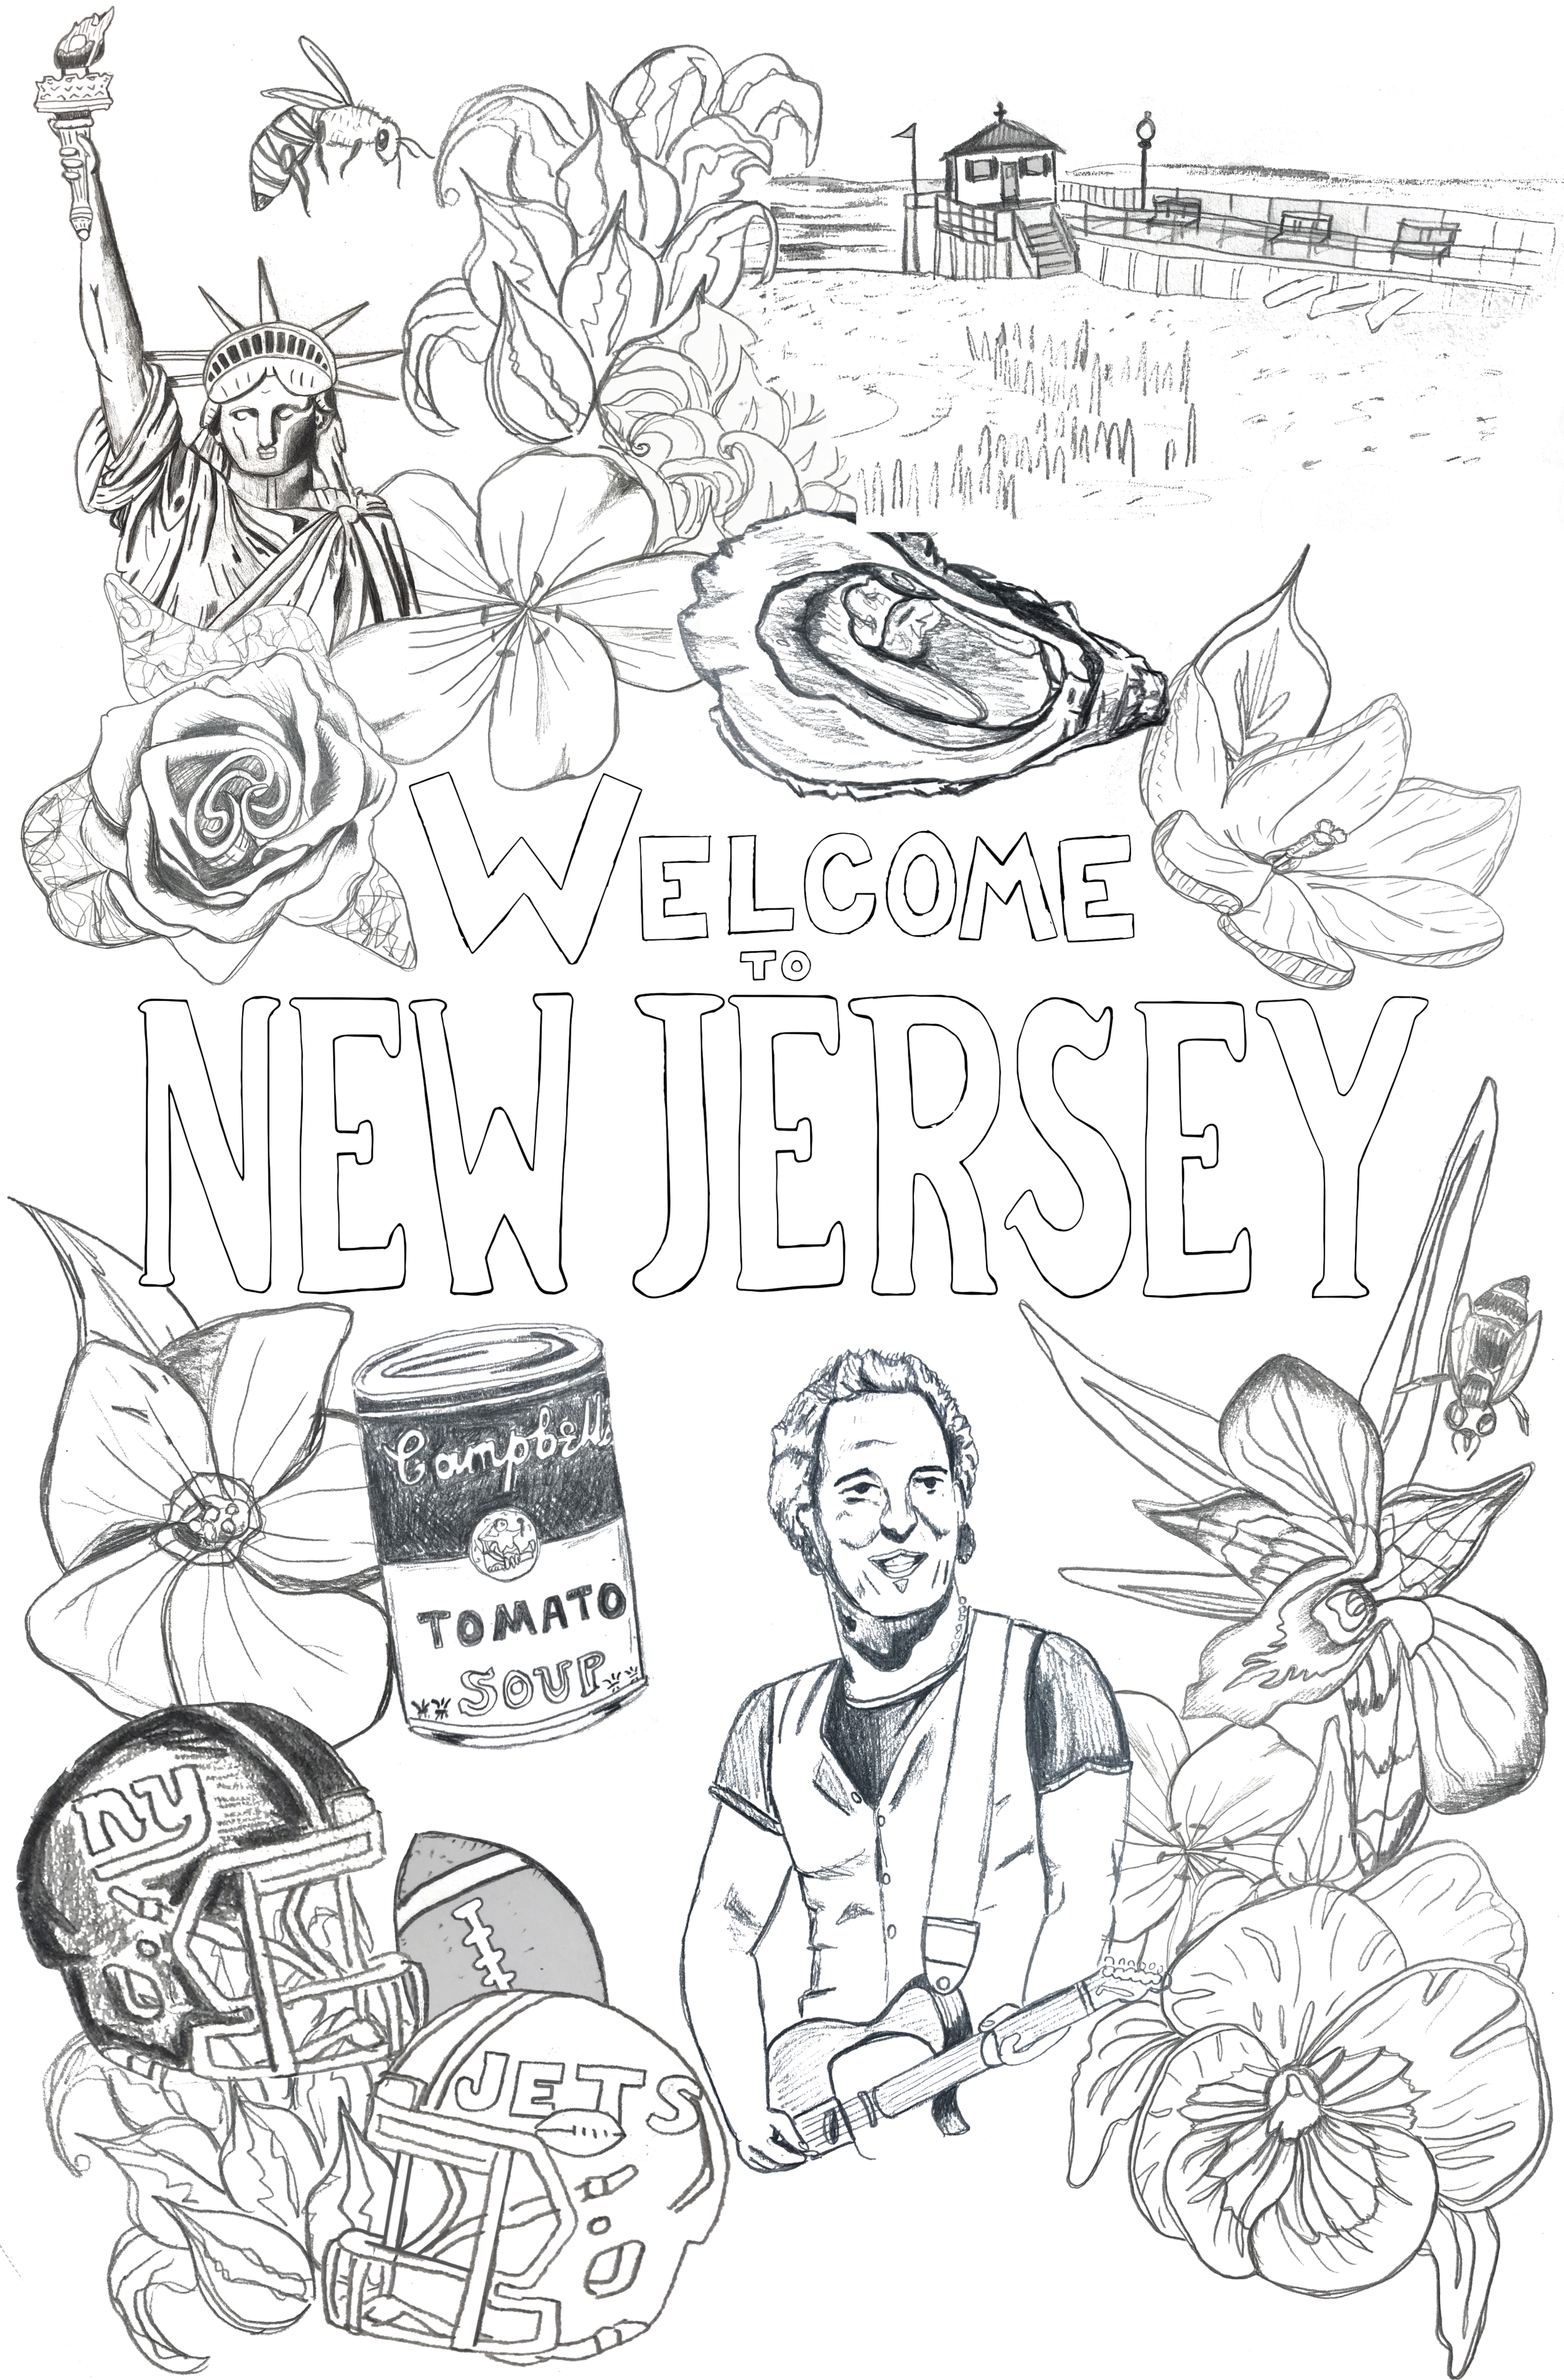 New Jersey Poster.png